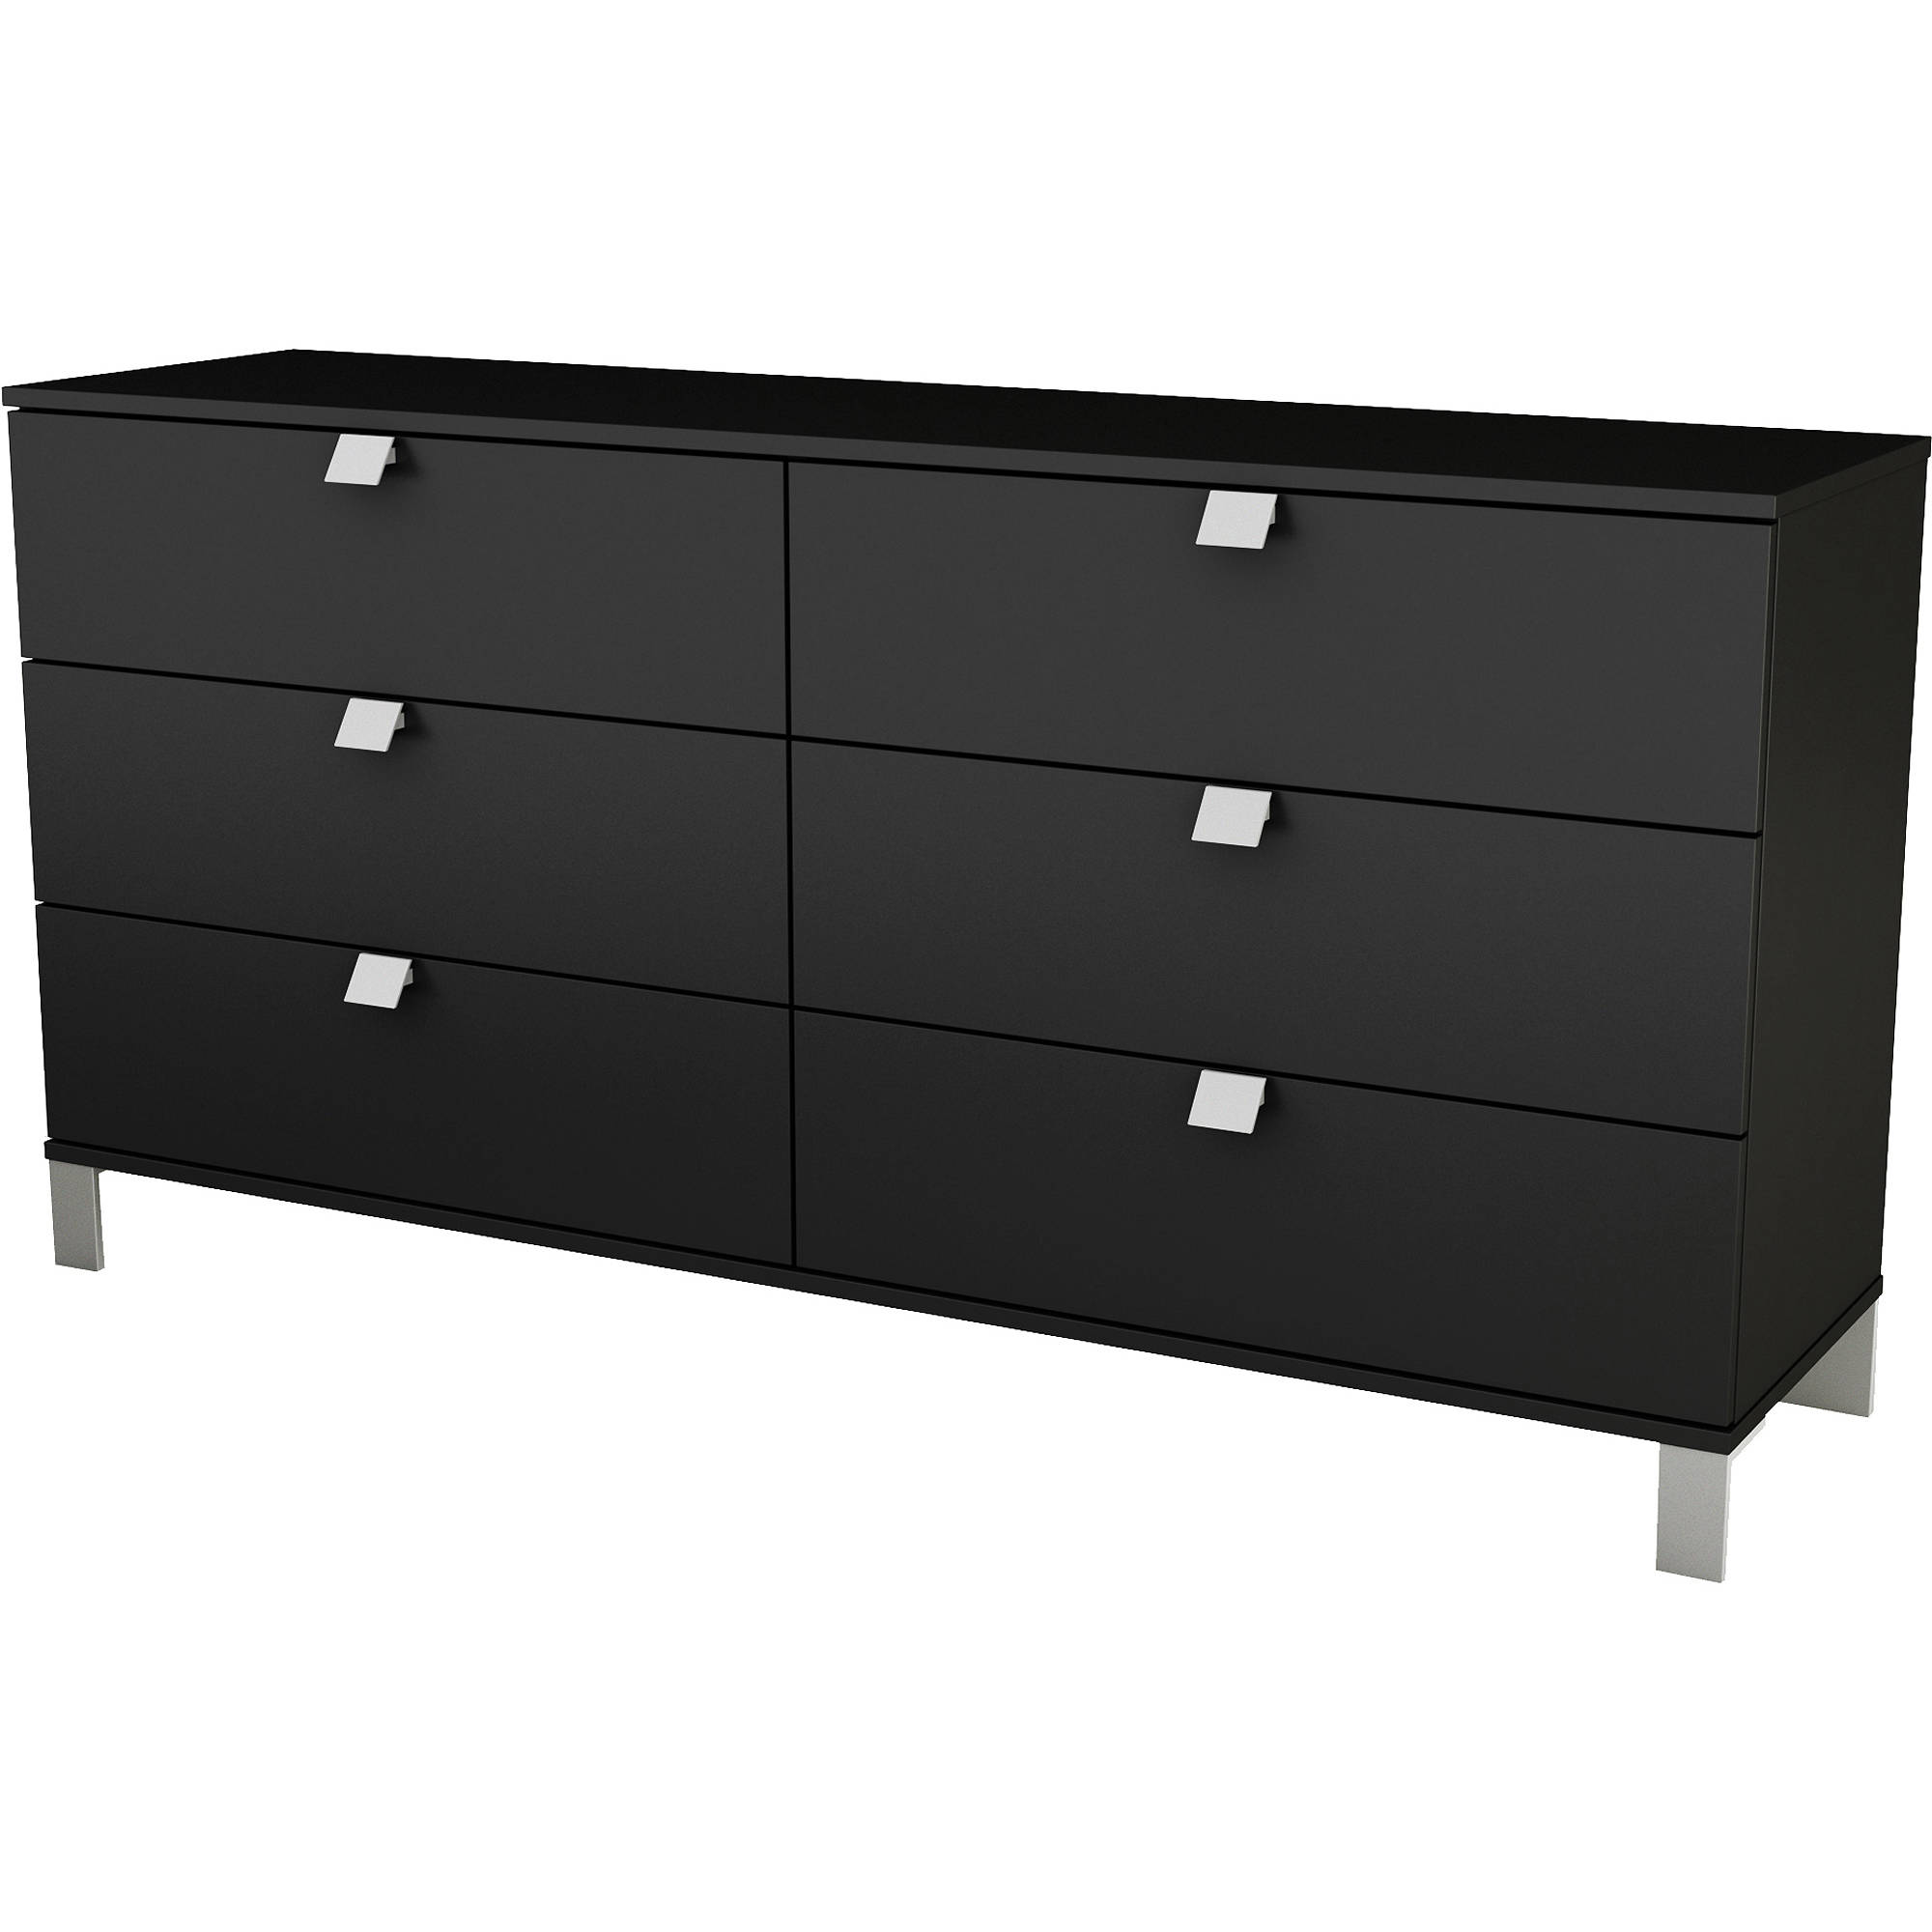 South Shore Spark 6-Drawer Double Dresser, Multiple Finishes - image 1 of 5